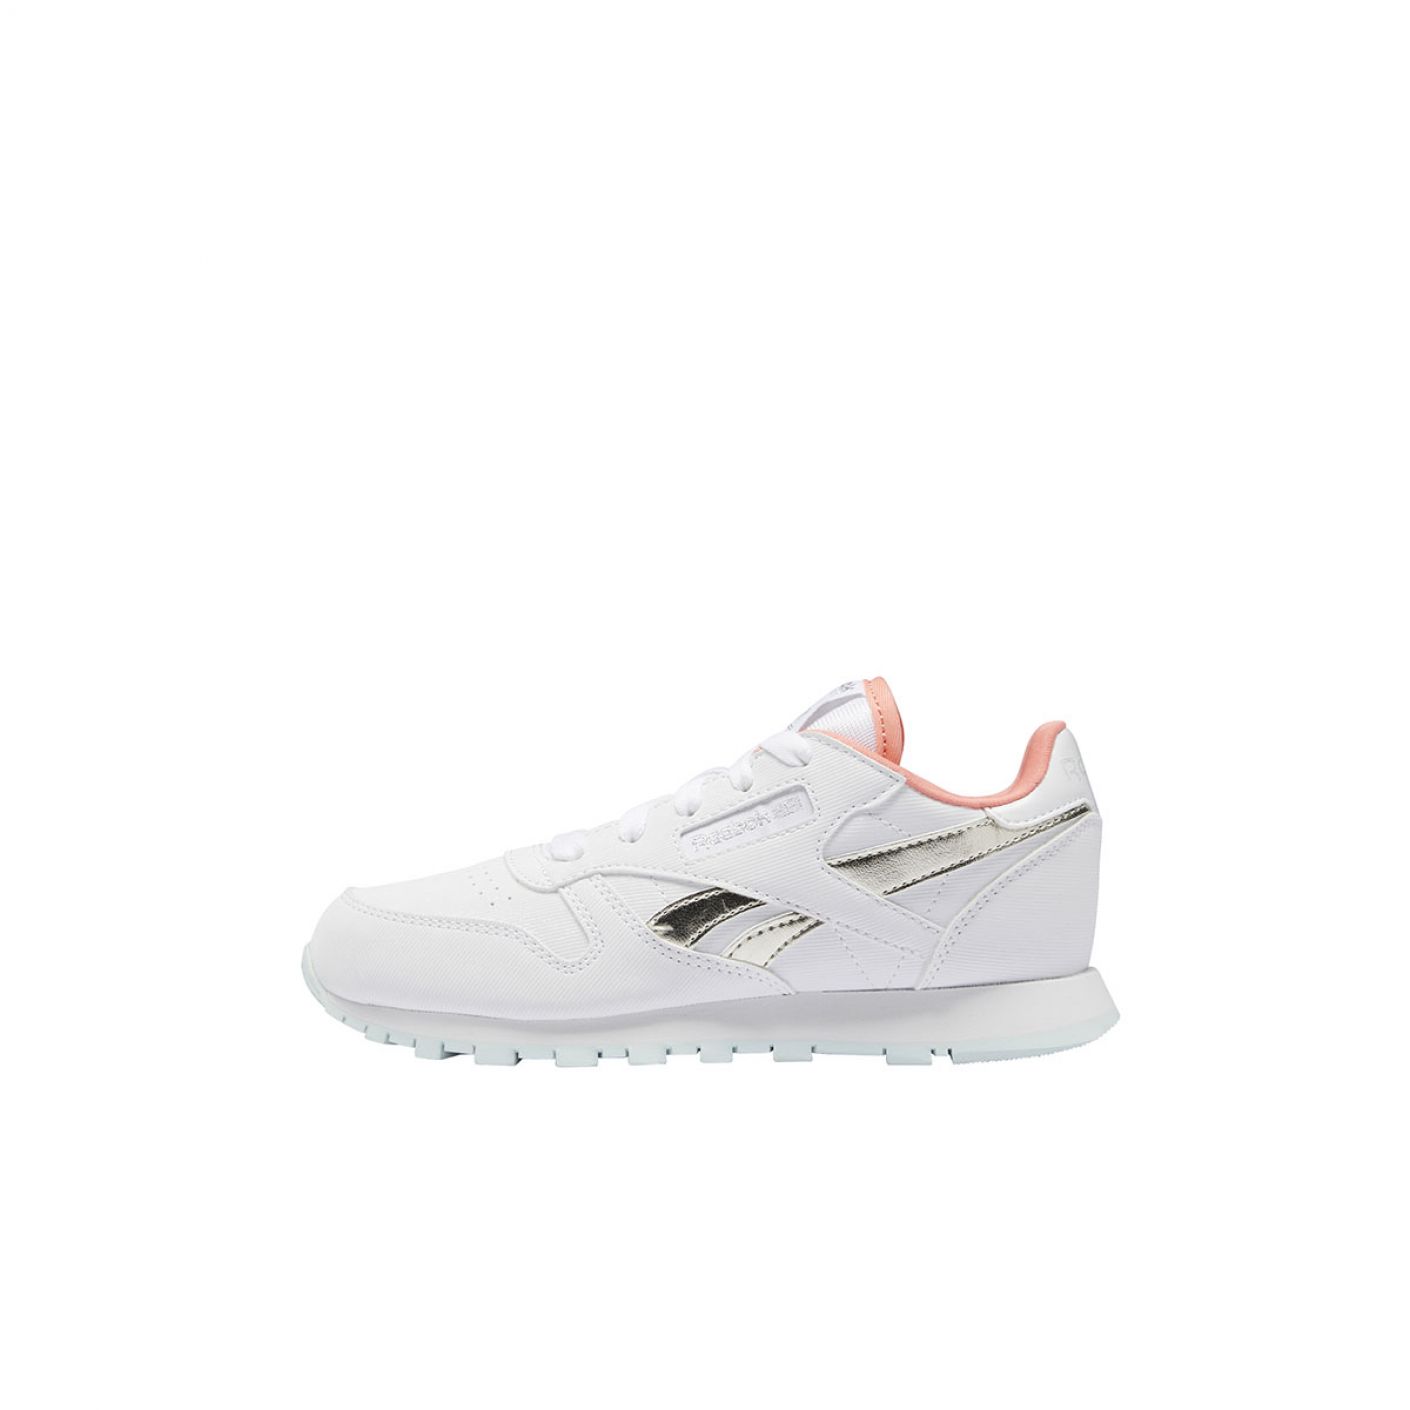 Reebok Cl Leather Junior White Chalk Blue Twisted Coral